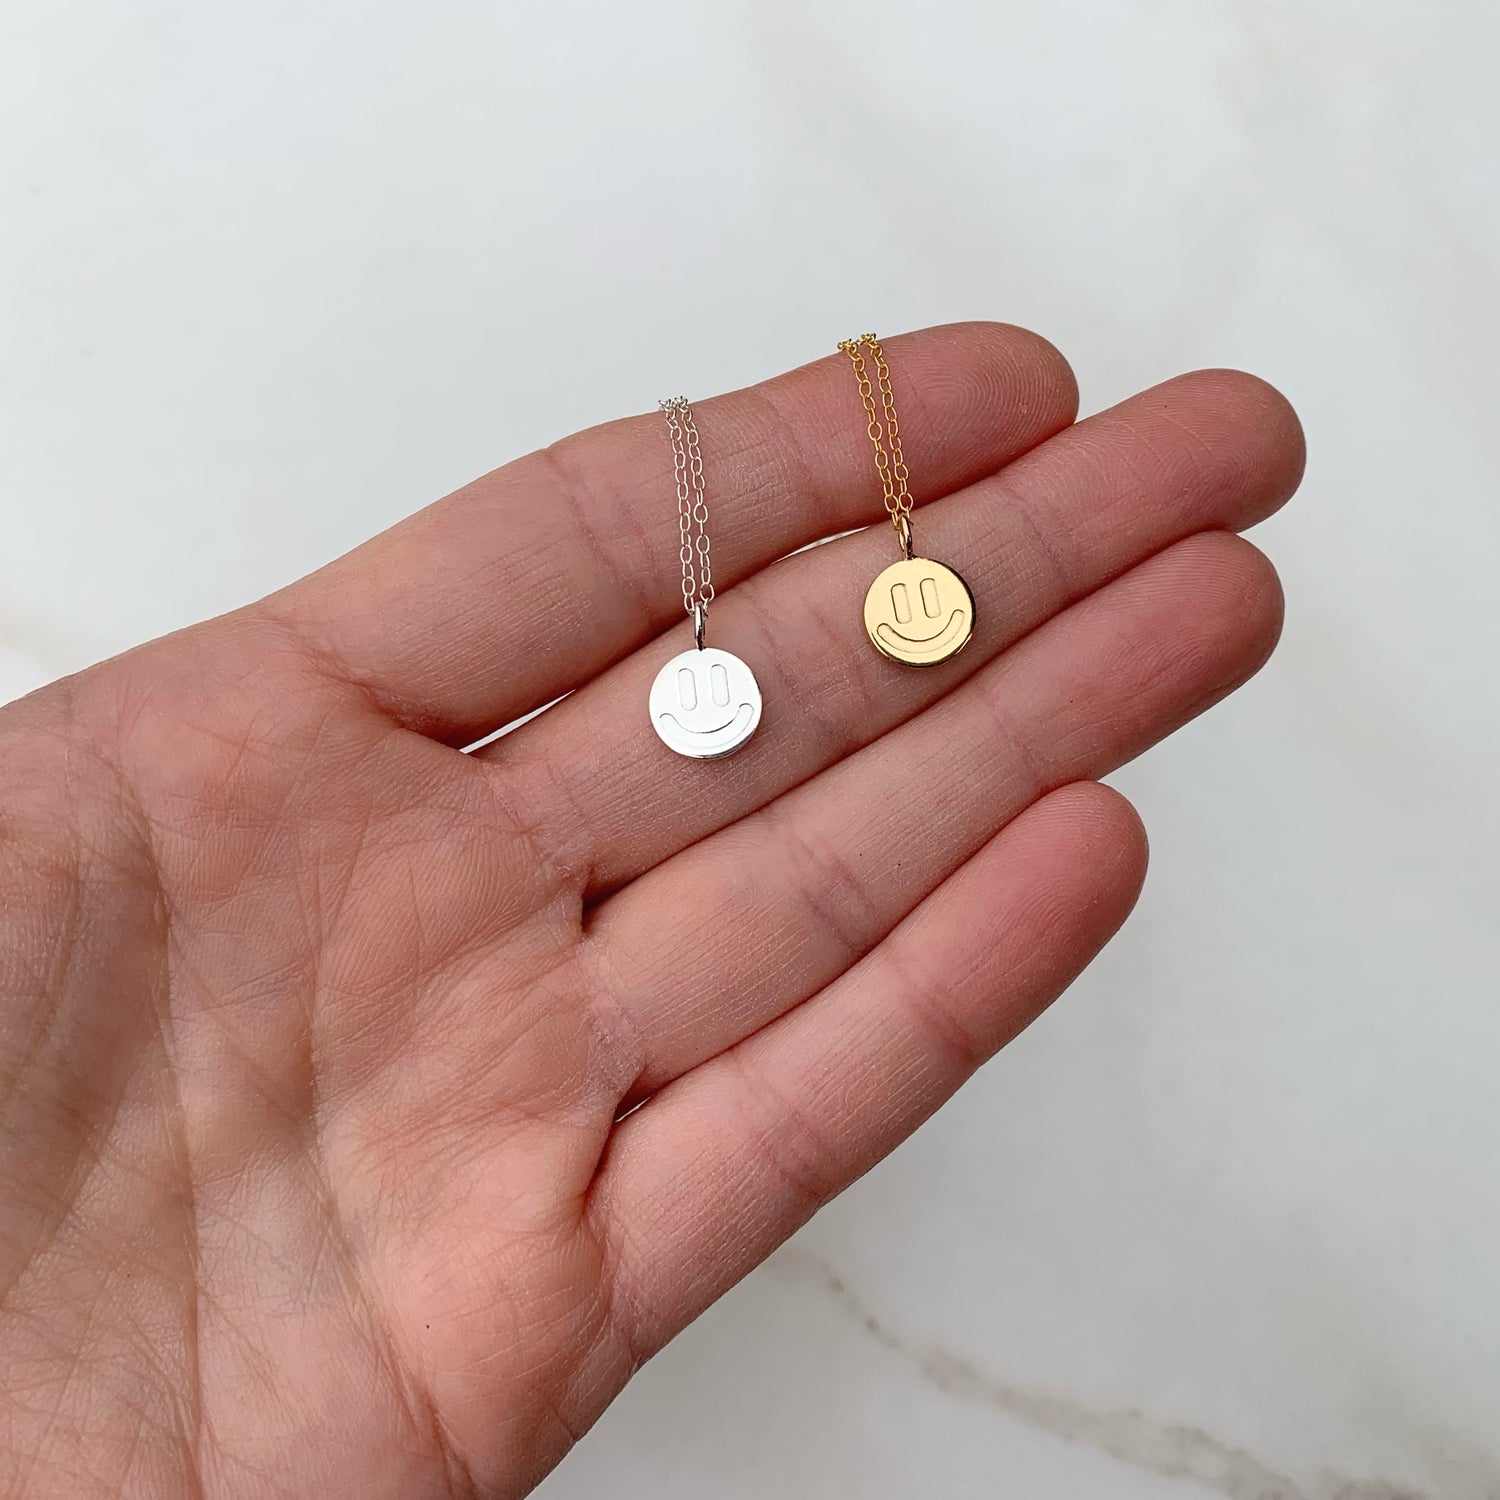 a sterling silver and a gold smiley face necklace being held in a hand over a white background